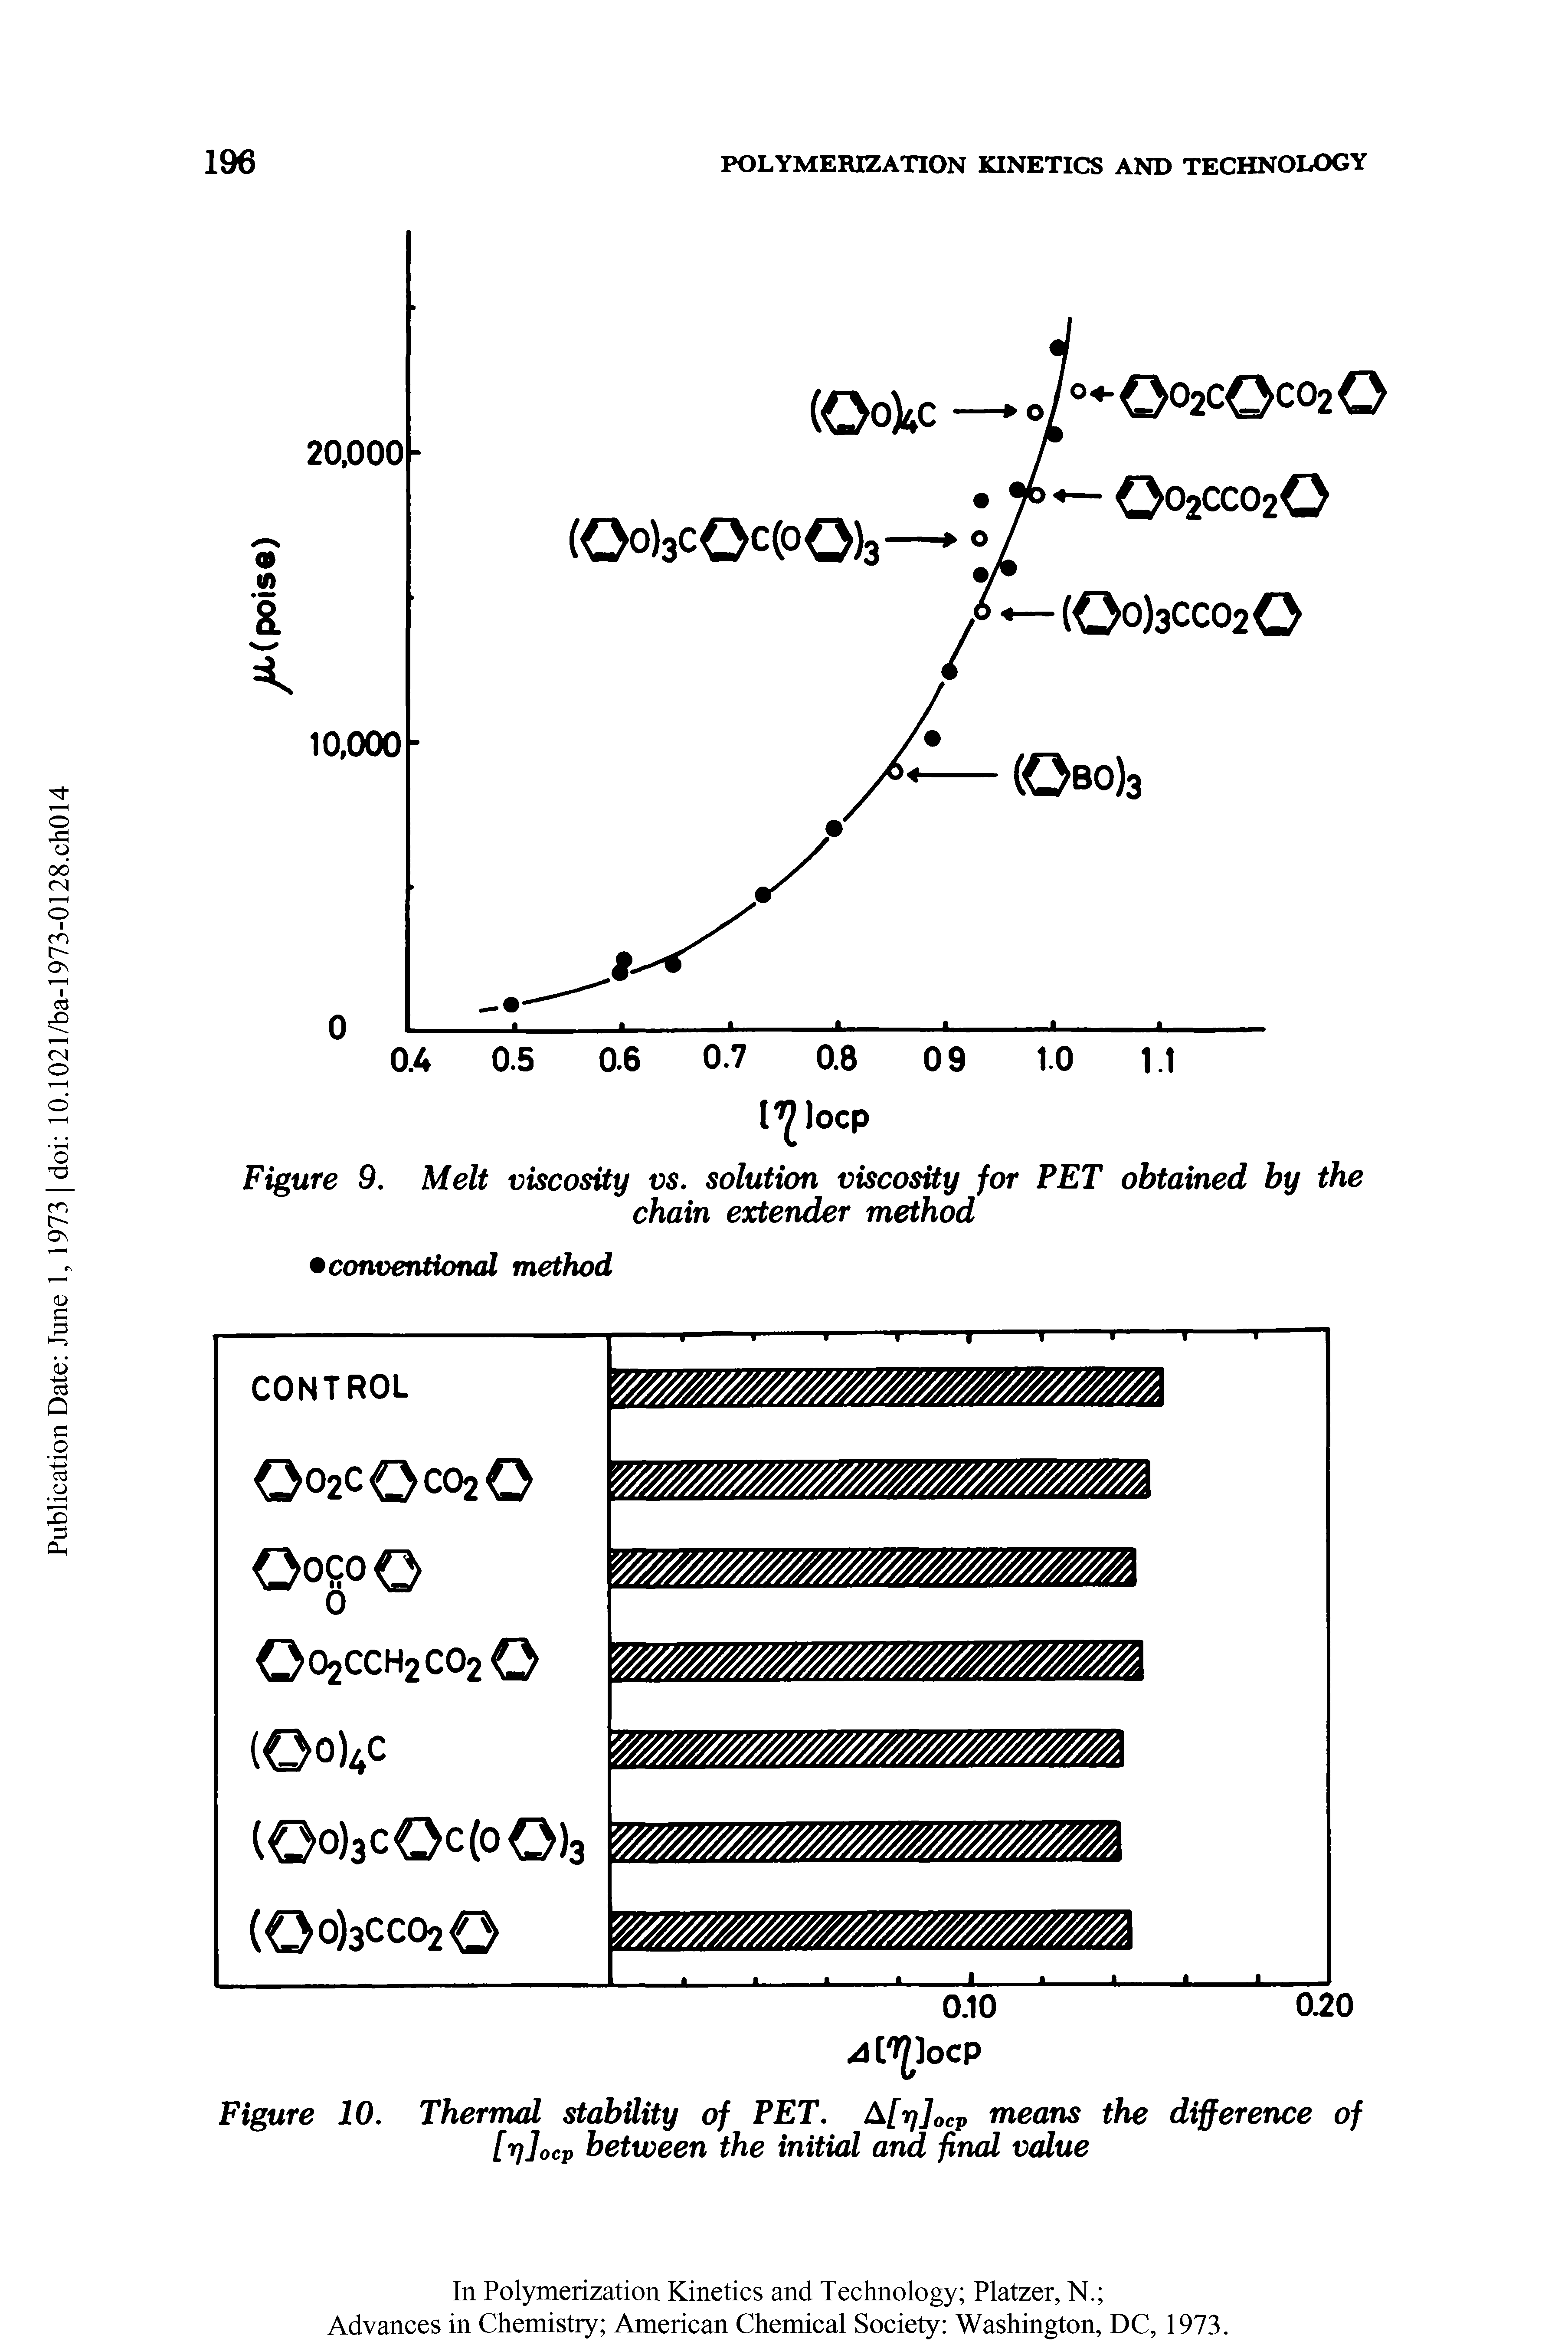 Figure 10. Thermal stability of PET. A[rj]ocp means the difference of [rj]ocp between the initial and final value...